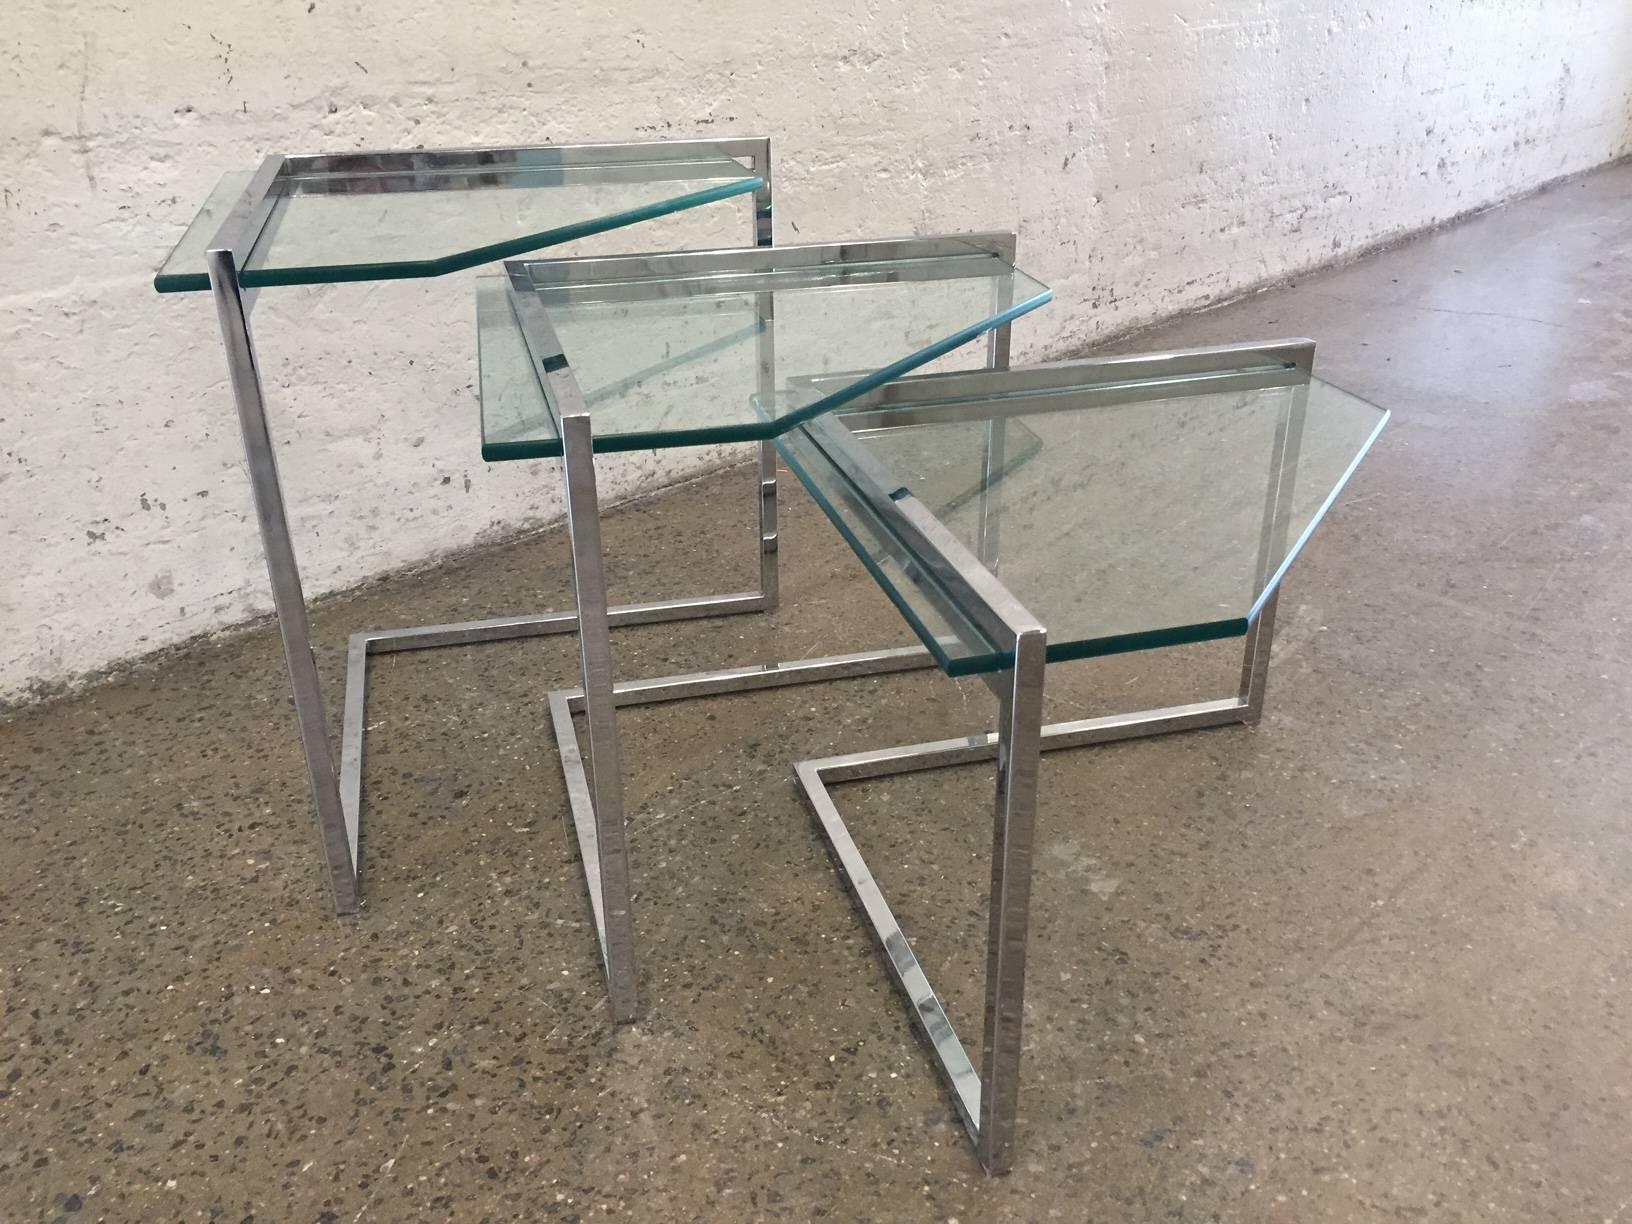 Milo Baughman Style Chrome Nest of Tables.  The tables have triangular glass tops with a nice chrome frame.  
Larger table measures: 22.25